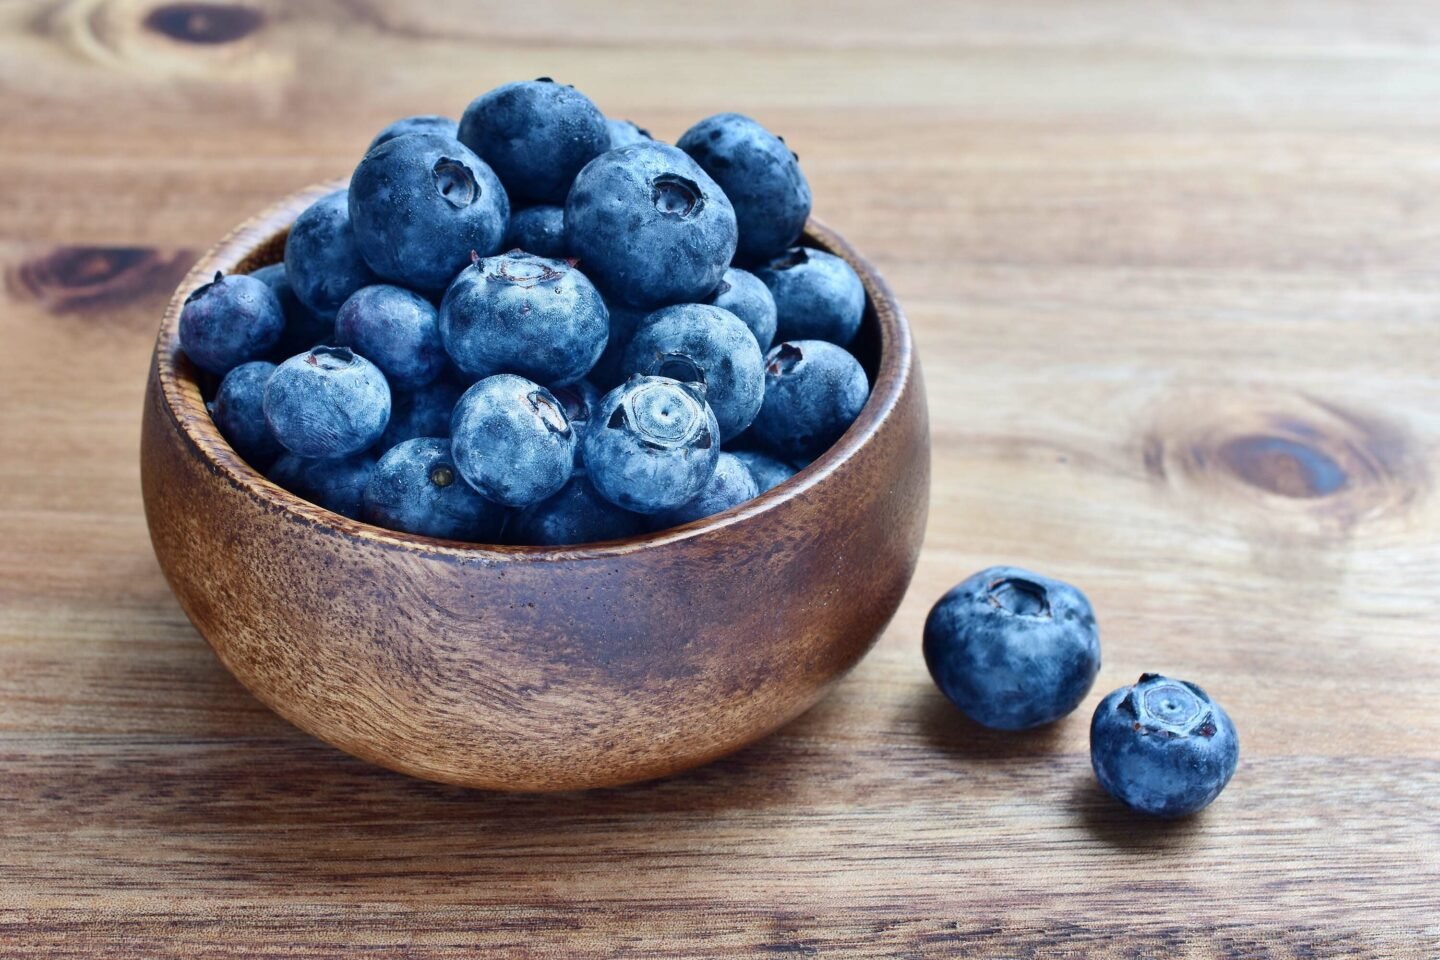 blueberries in wooden bowl